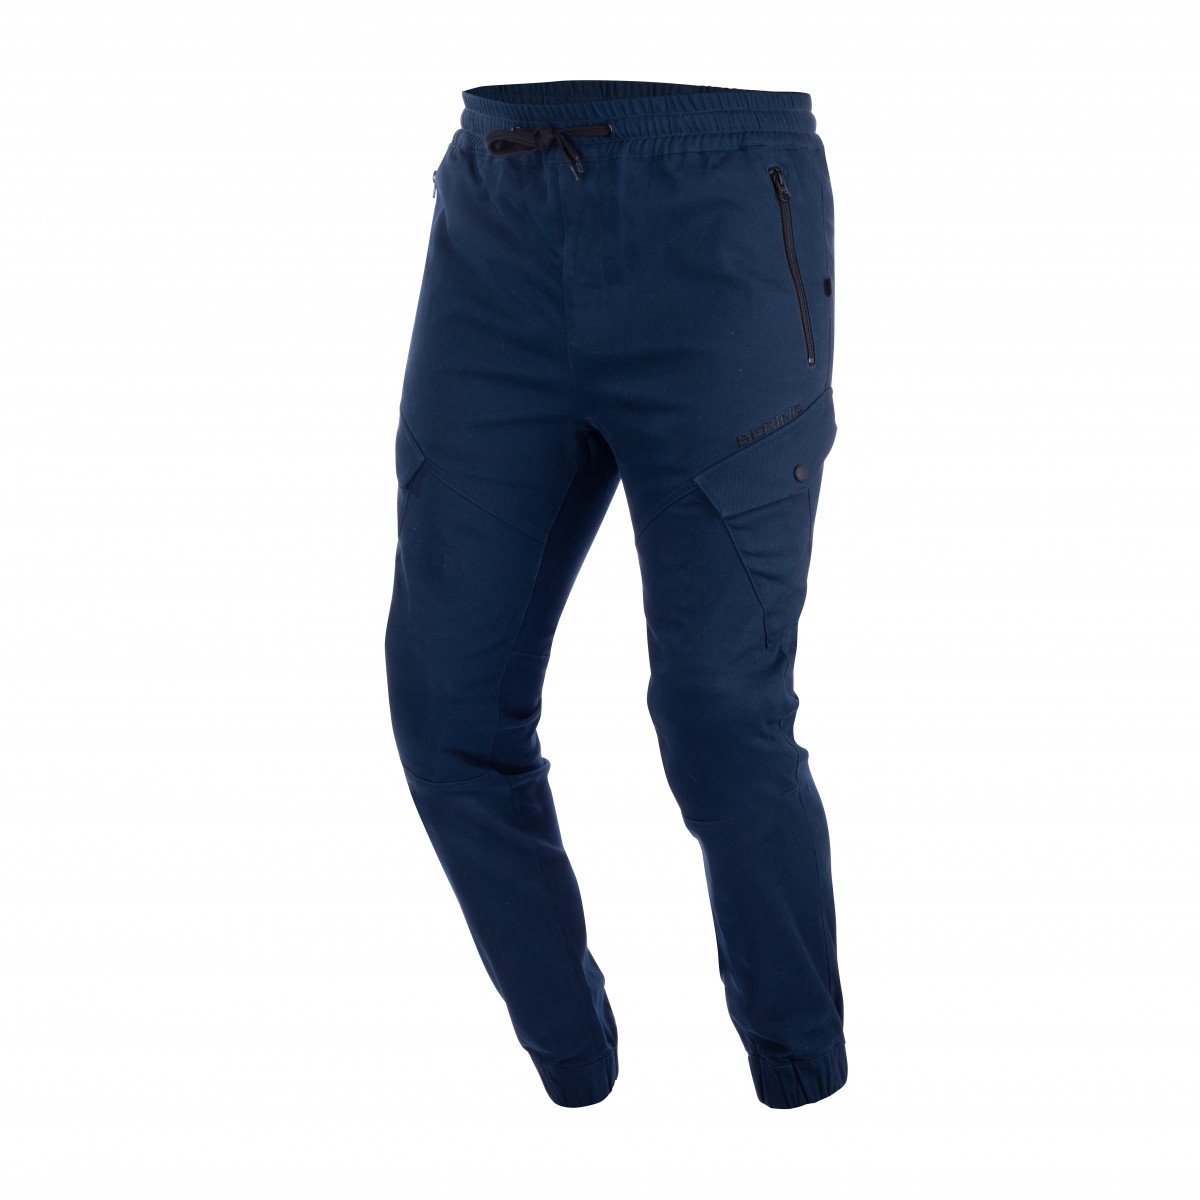 Image of Bering Trousers Richie Navy Blue Size 4XL ID 3660815167779